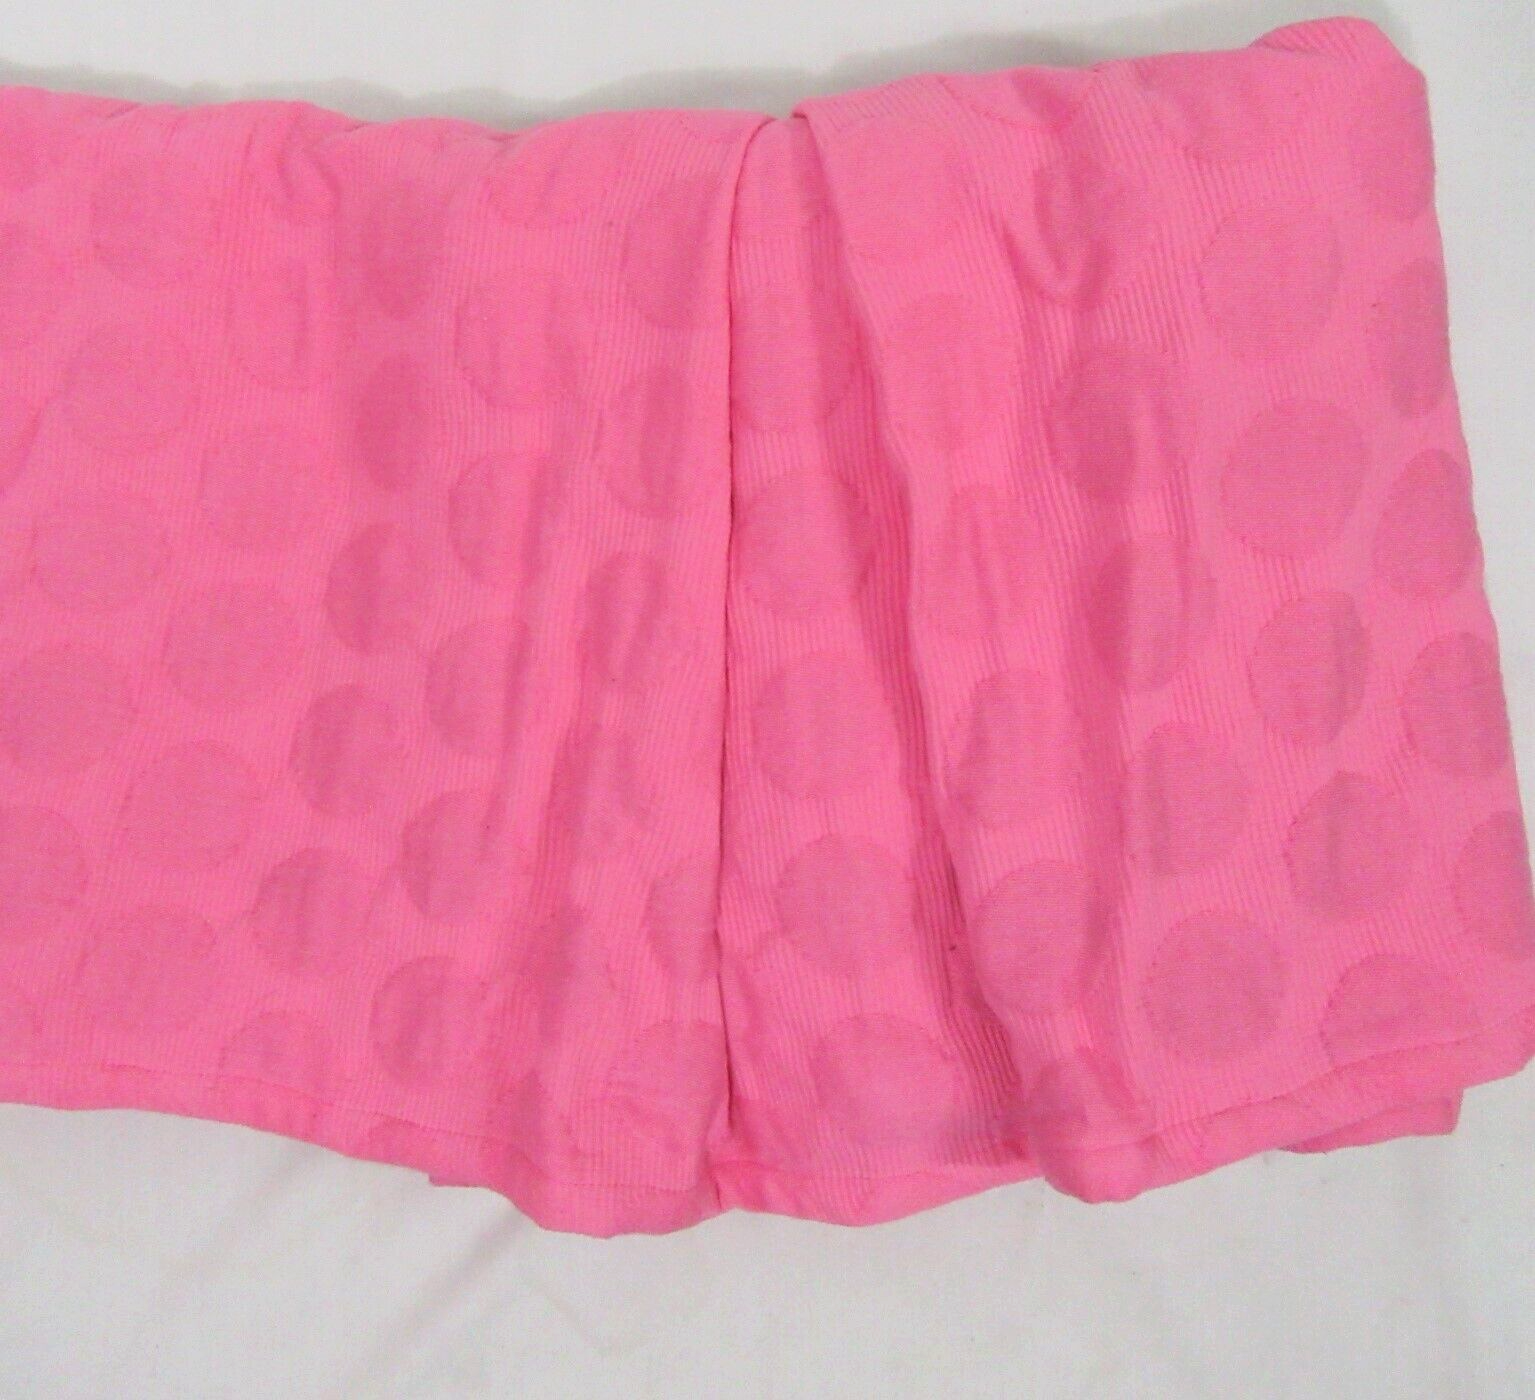 Primary image for Pottery Barn Teen Big Dot Matelasse Hot Pink Tailored Twin X-Long Bed-Skirt